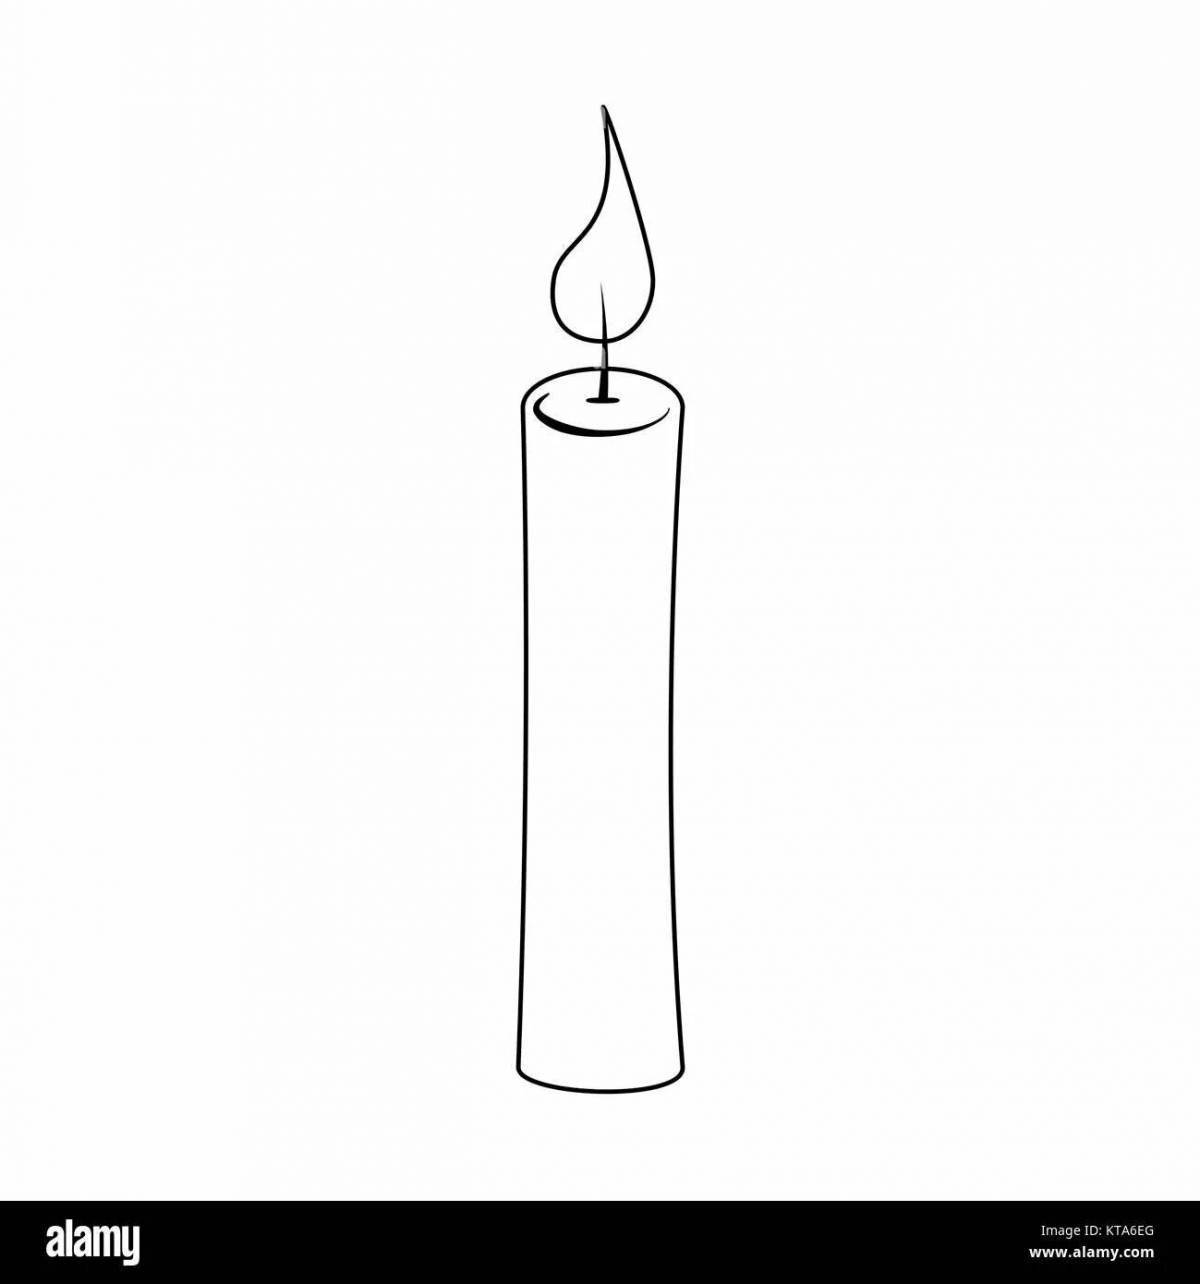 Merry Candle of Memory Coloring Page for Toddlers